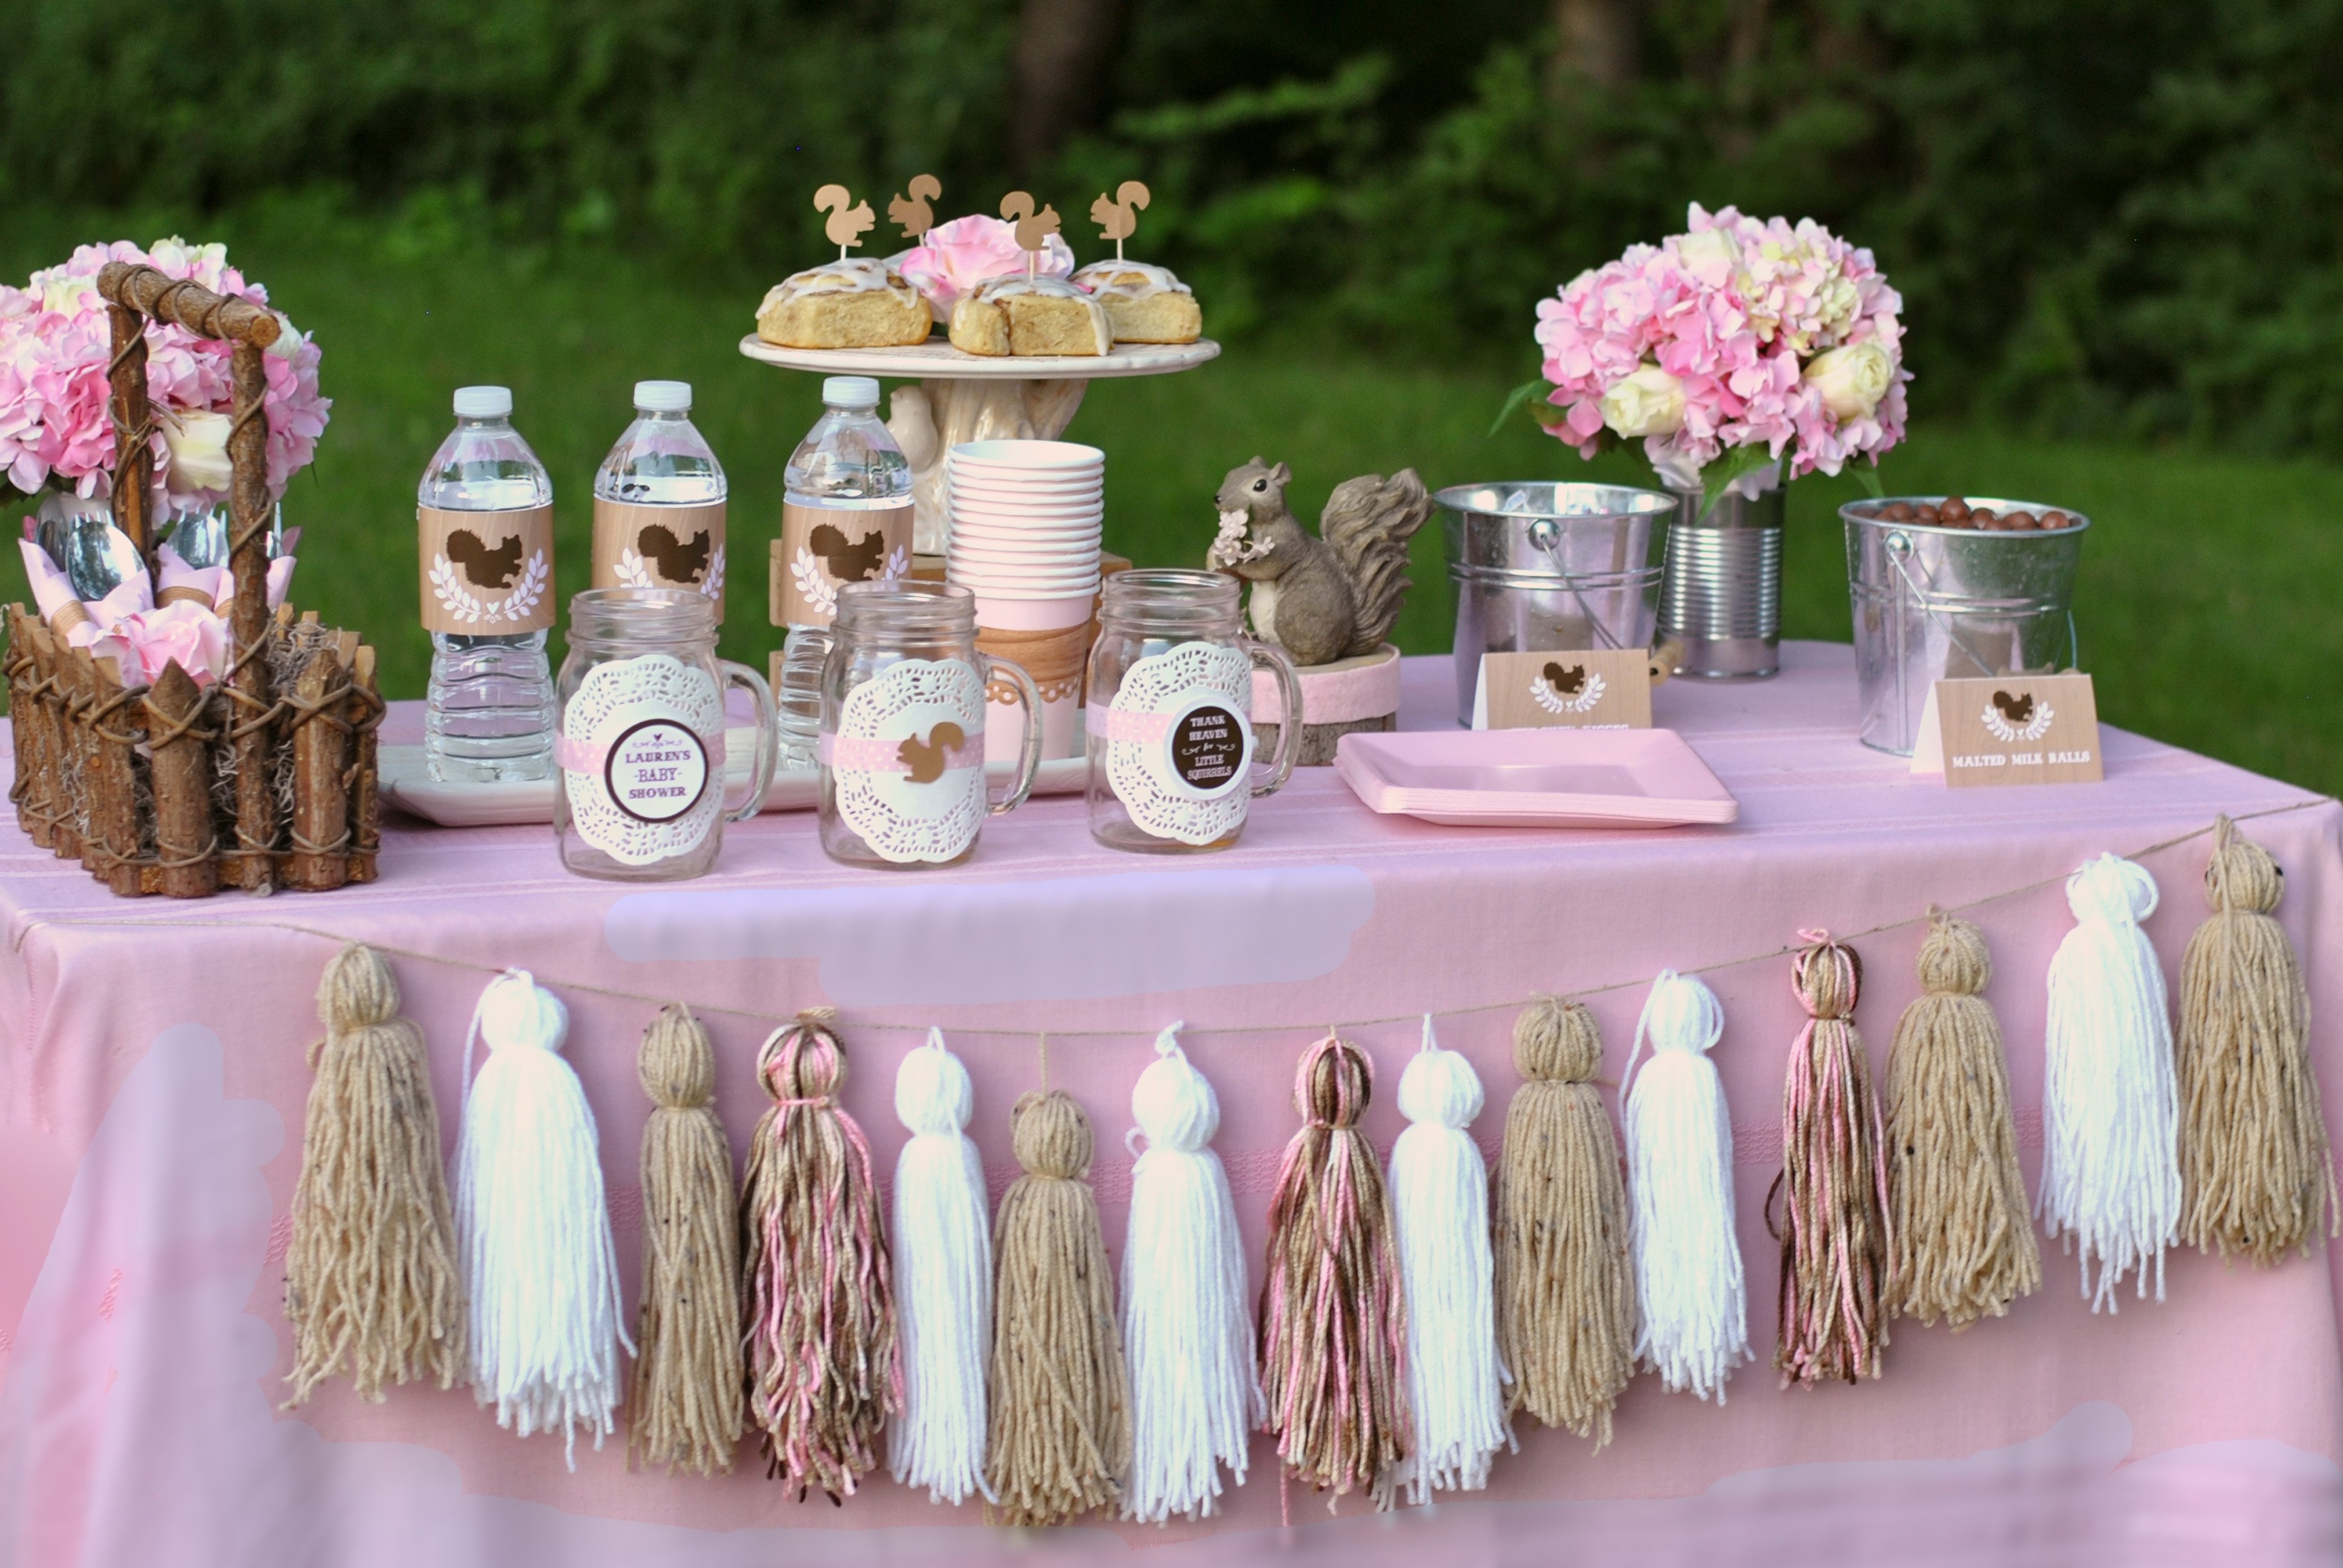 10 Nice Baby Shower Decorating Ideas For A Girl baby shower theme ideas for girl omega center ideas for baby 2 2022